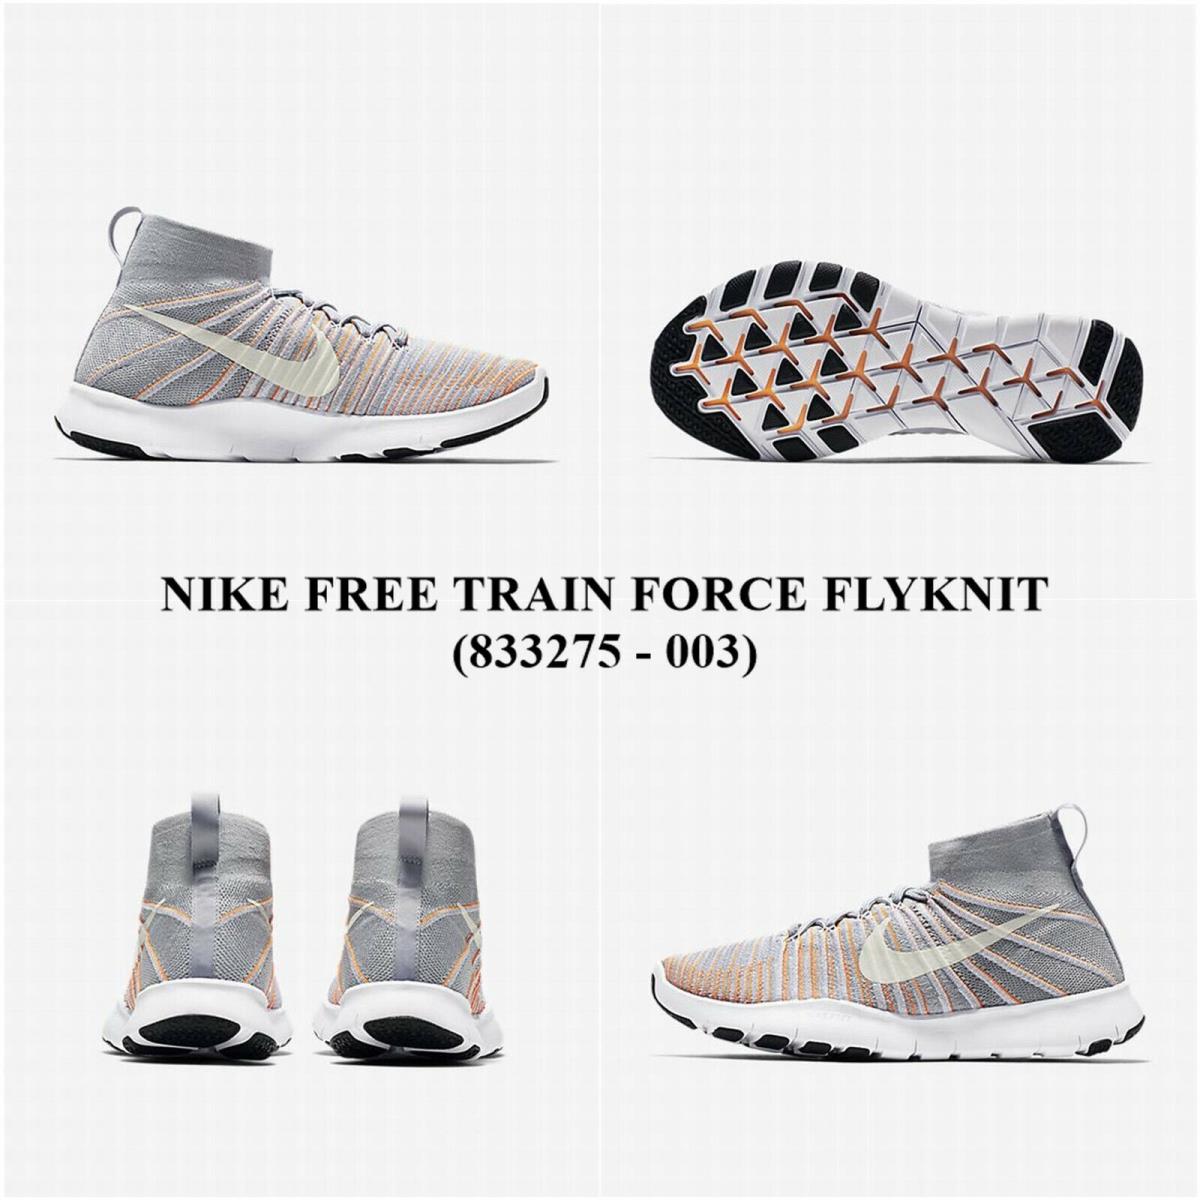 Nike Men`s Free Train Force Flyknit 833275 - 003 Trainning Shoes with Box